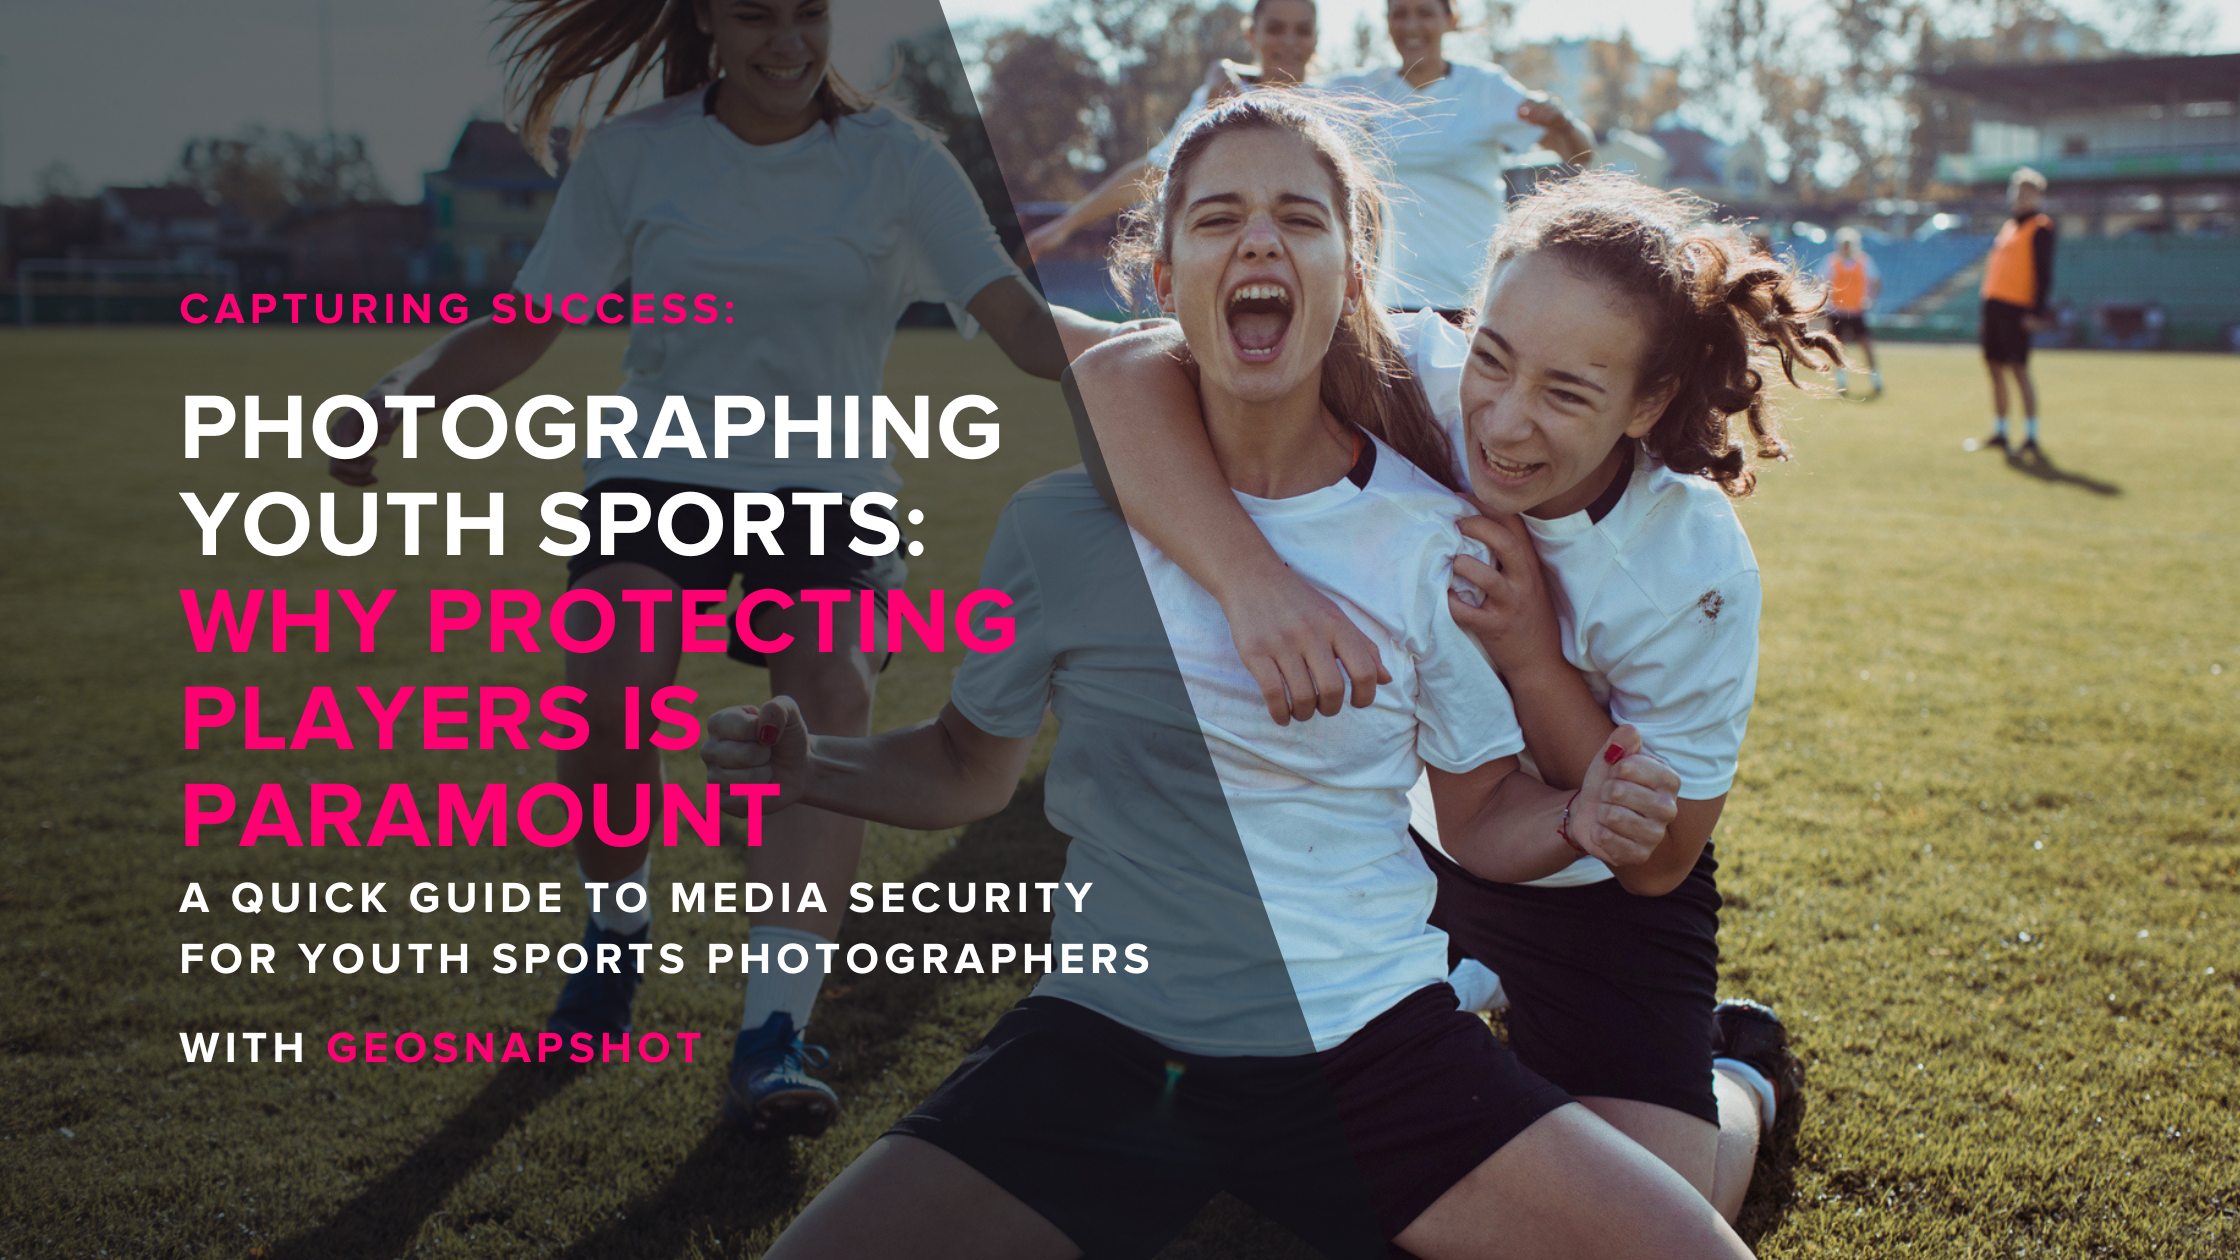 Copy of Marketing Your Event Photography Five Winning Plays for Sports Photographers 